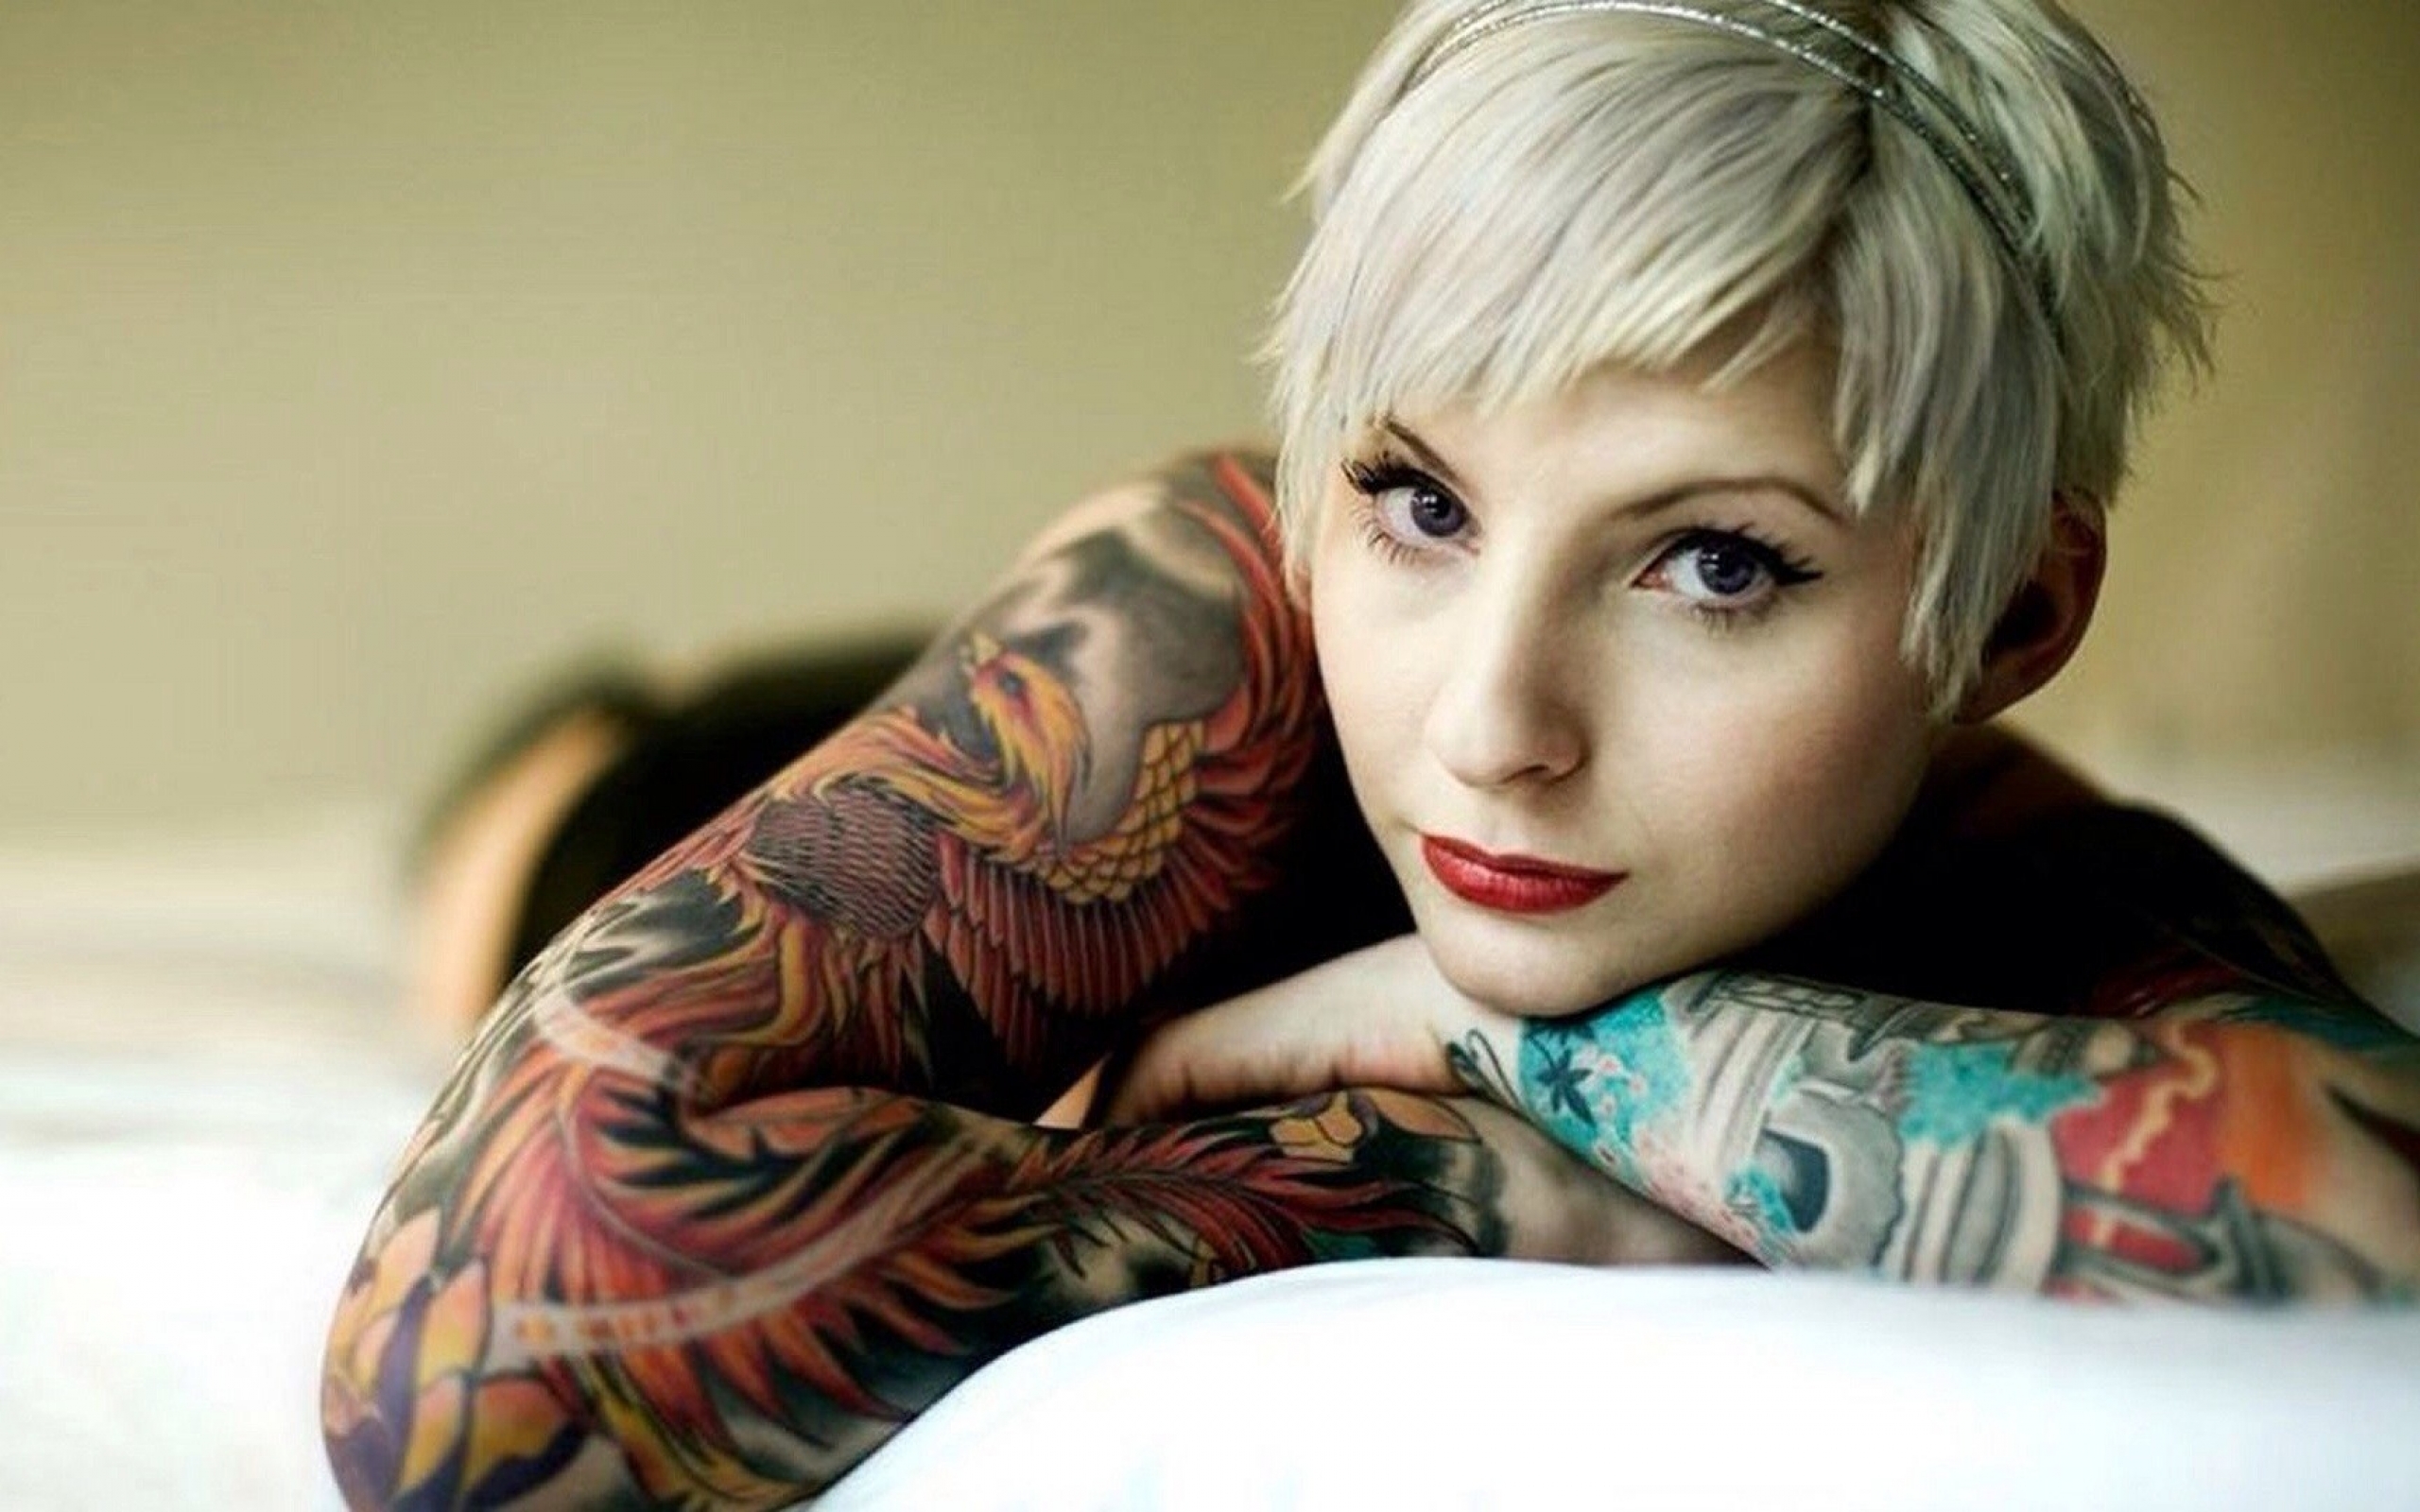 Download Wallpapers, Download 2560x1600 blondes tattoos women